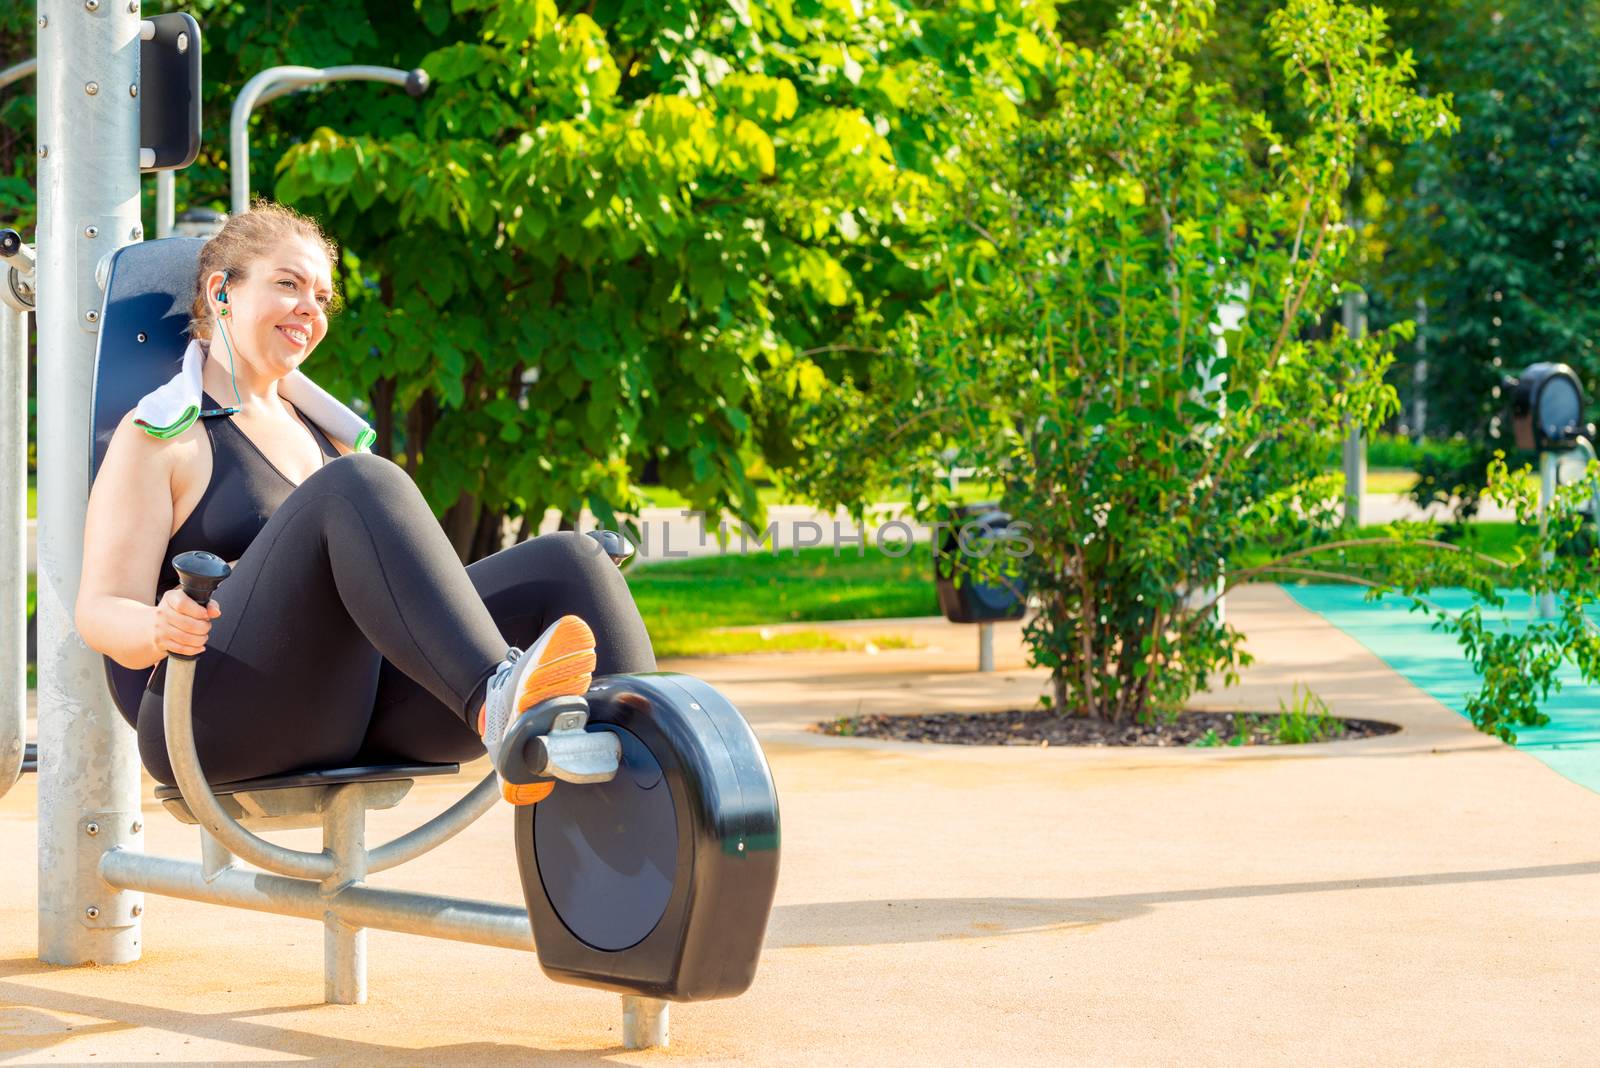 active oversized woman doing exercise on a stationary bike in a city park